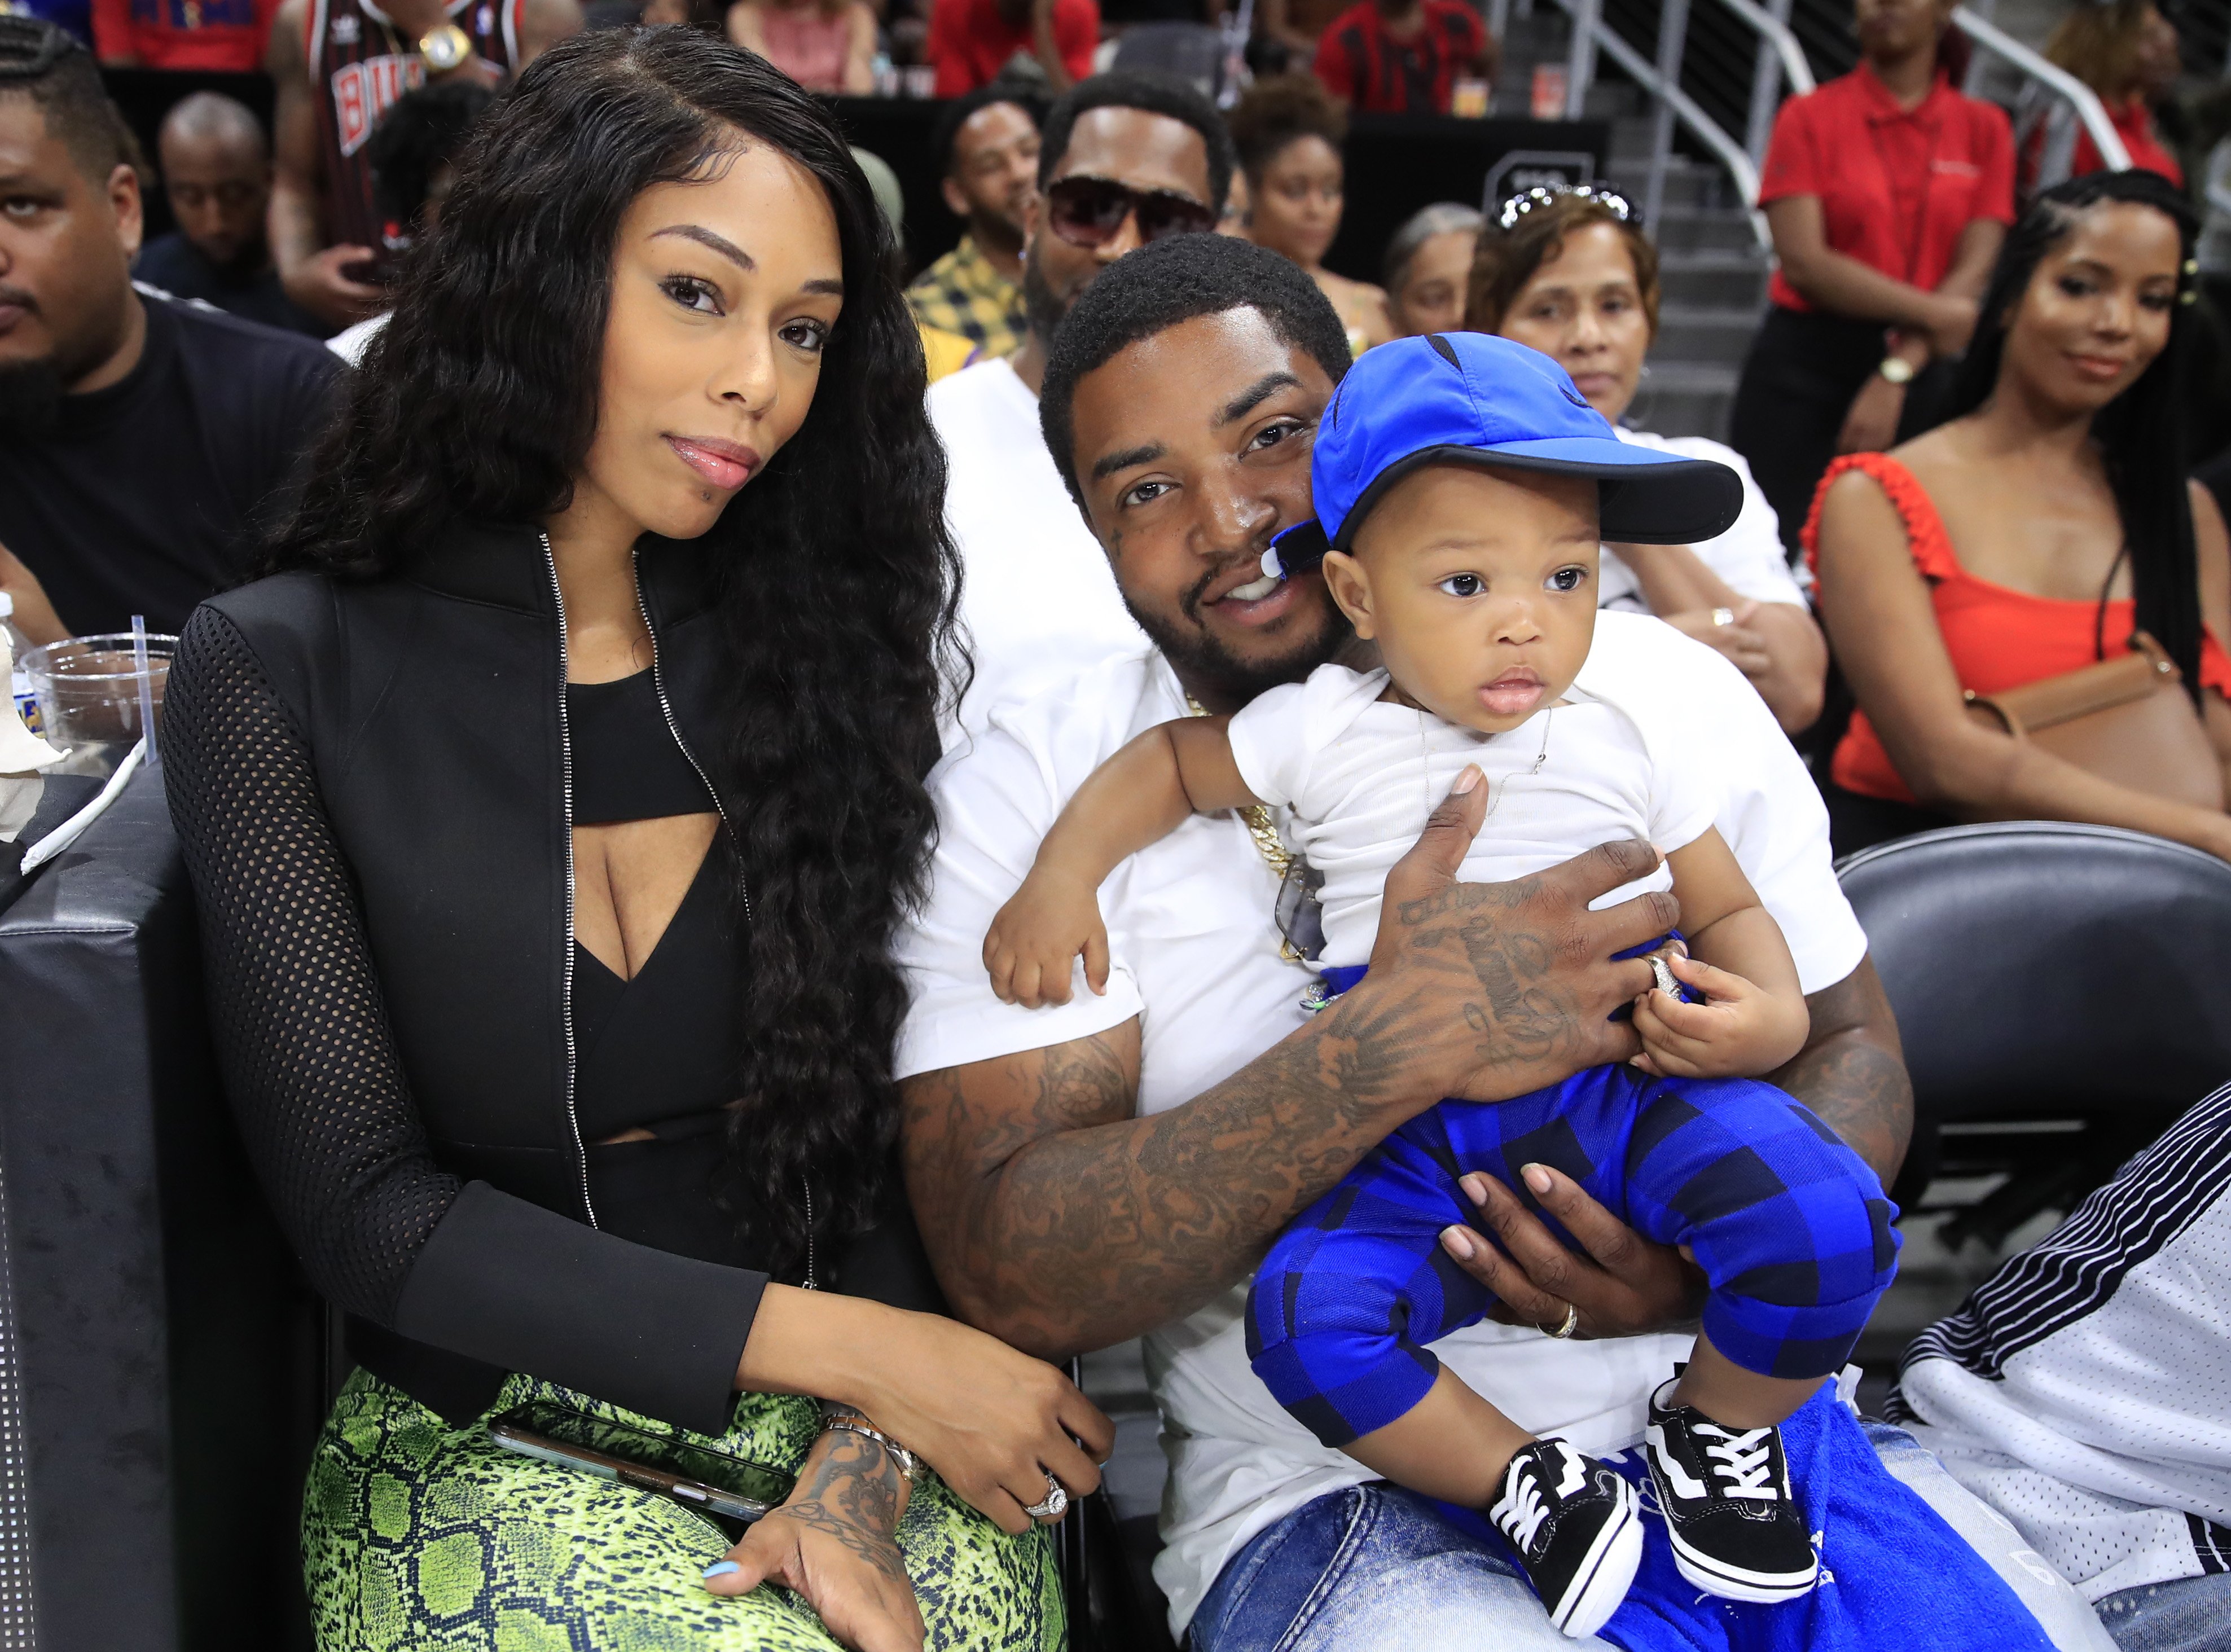 Bambi Benson, her husband Lil Scrappy, and their child Breland at the BIG3 three on three basketball league in Atlanta, Georgia, 2019 | Source: Getty Images